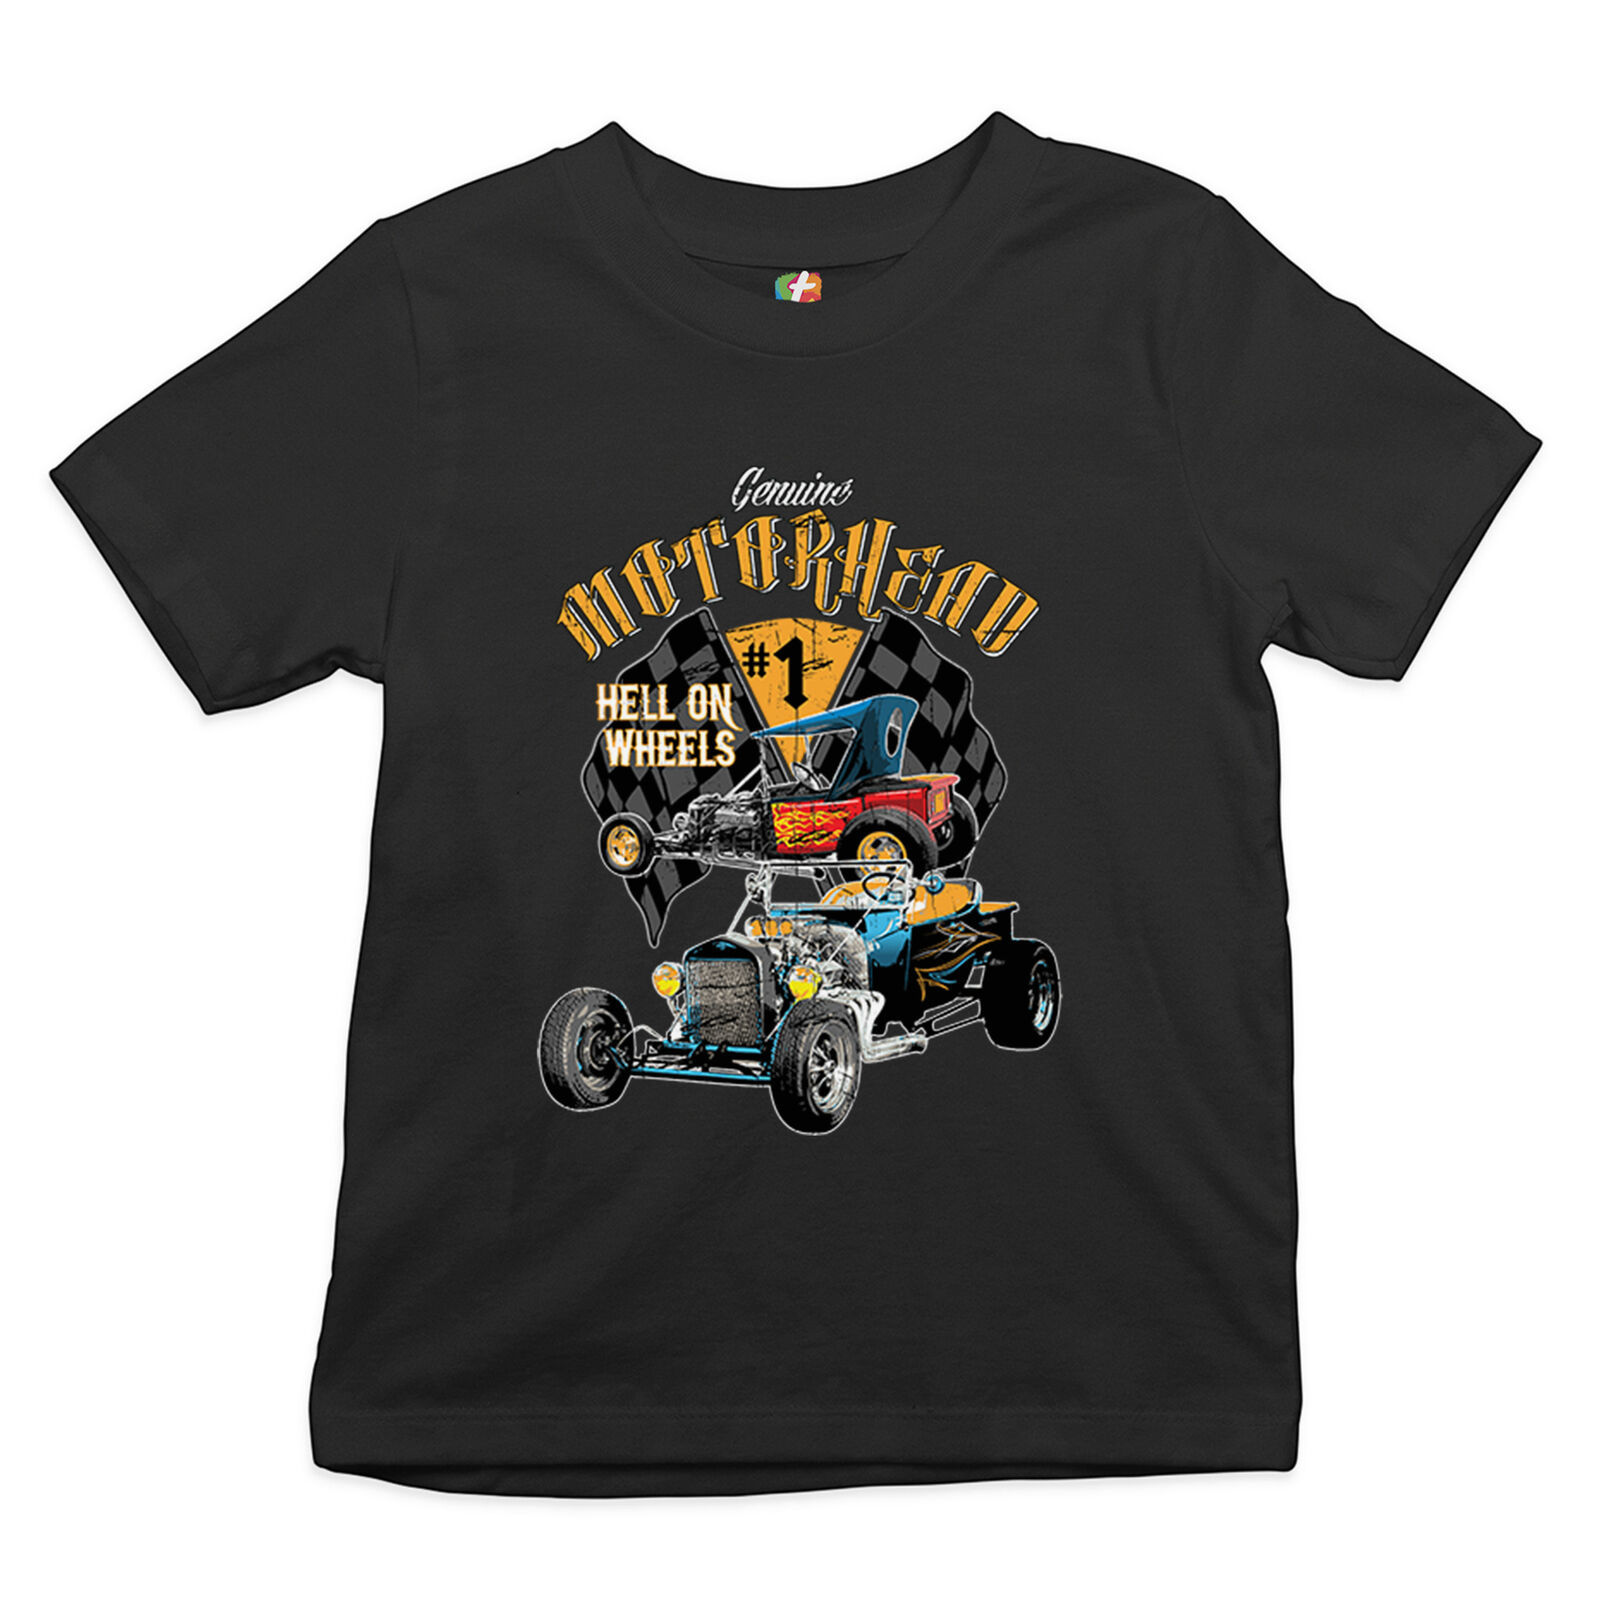 Motorhead Hot Rod Youth T-shirt Hell on Wheels Route 66 Drag Racing Kids